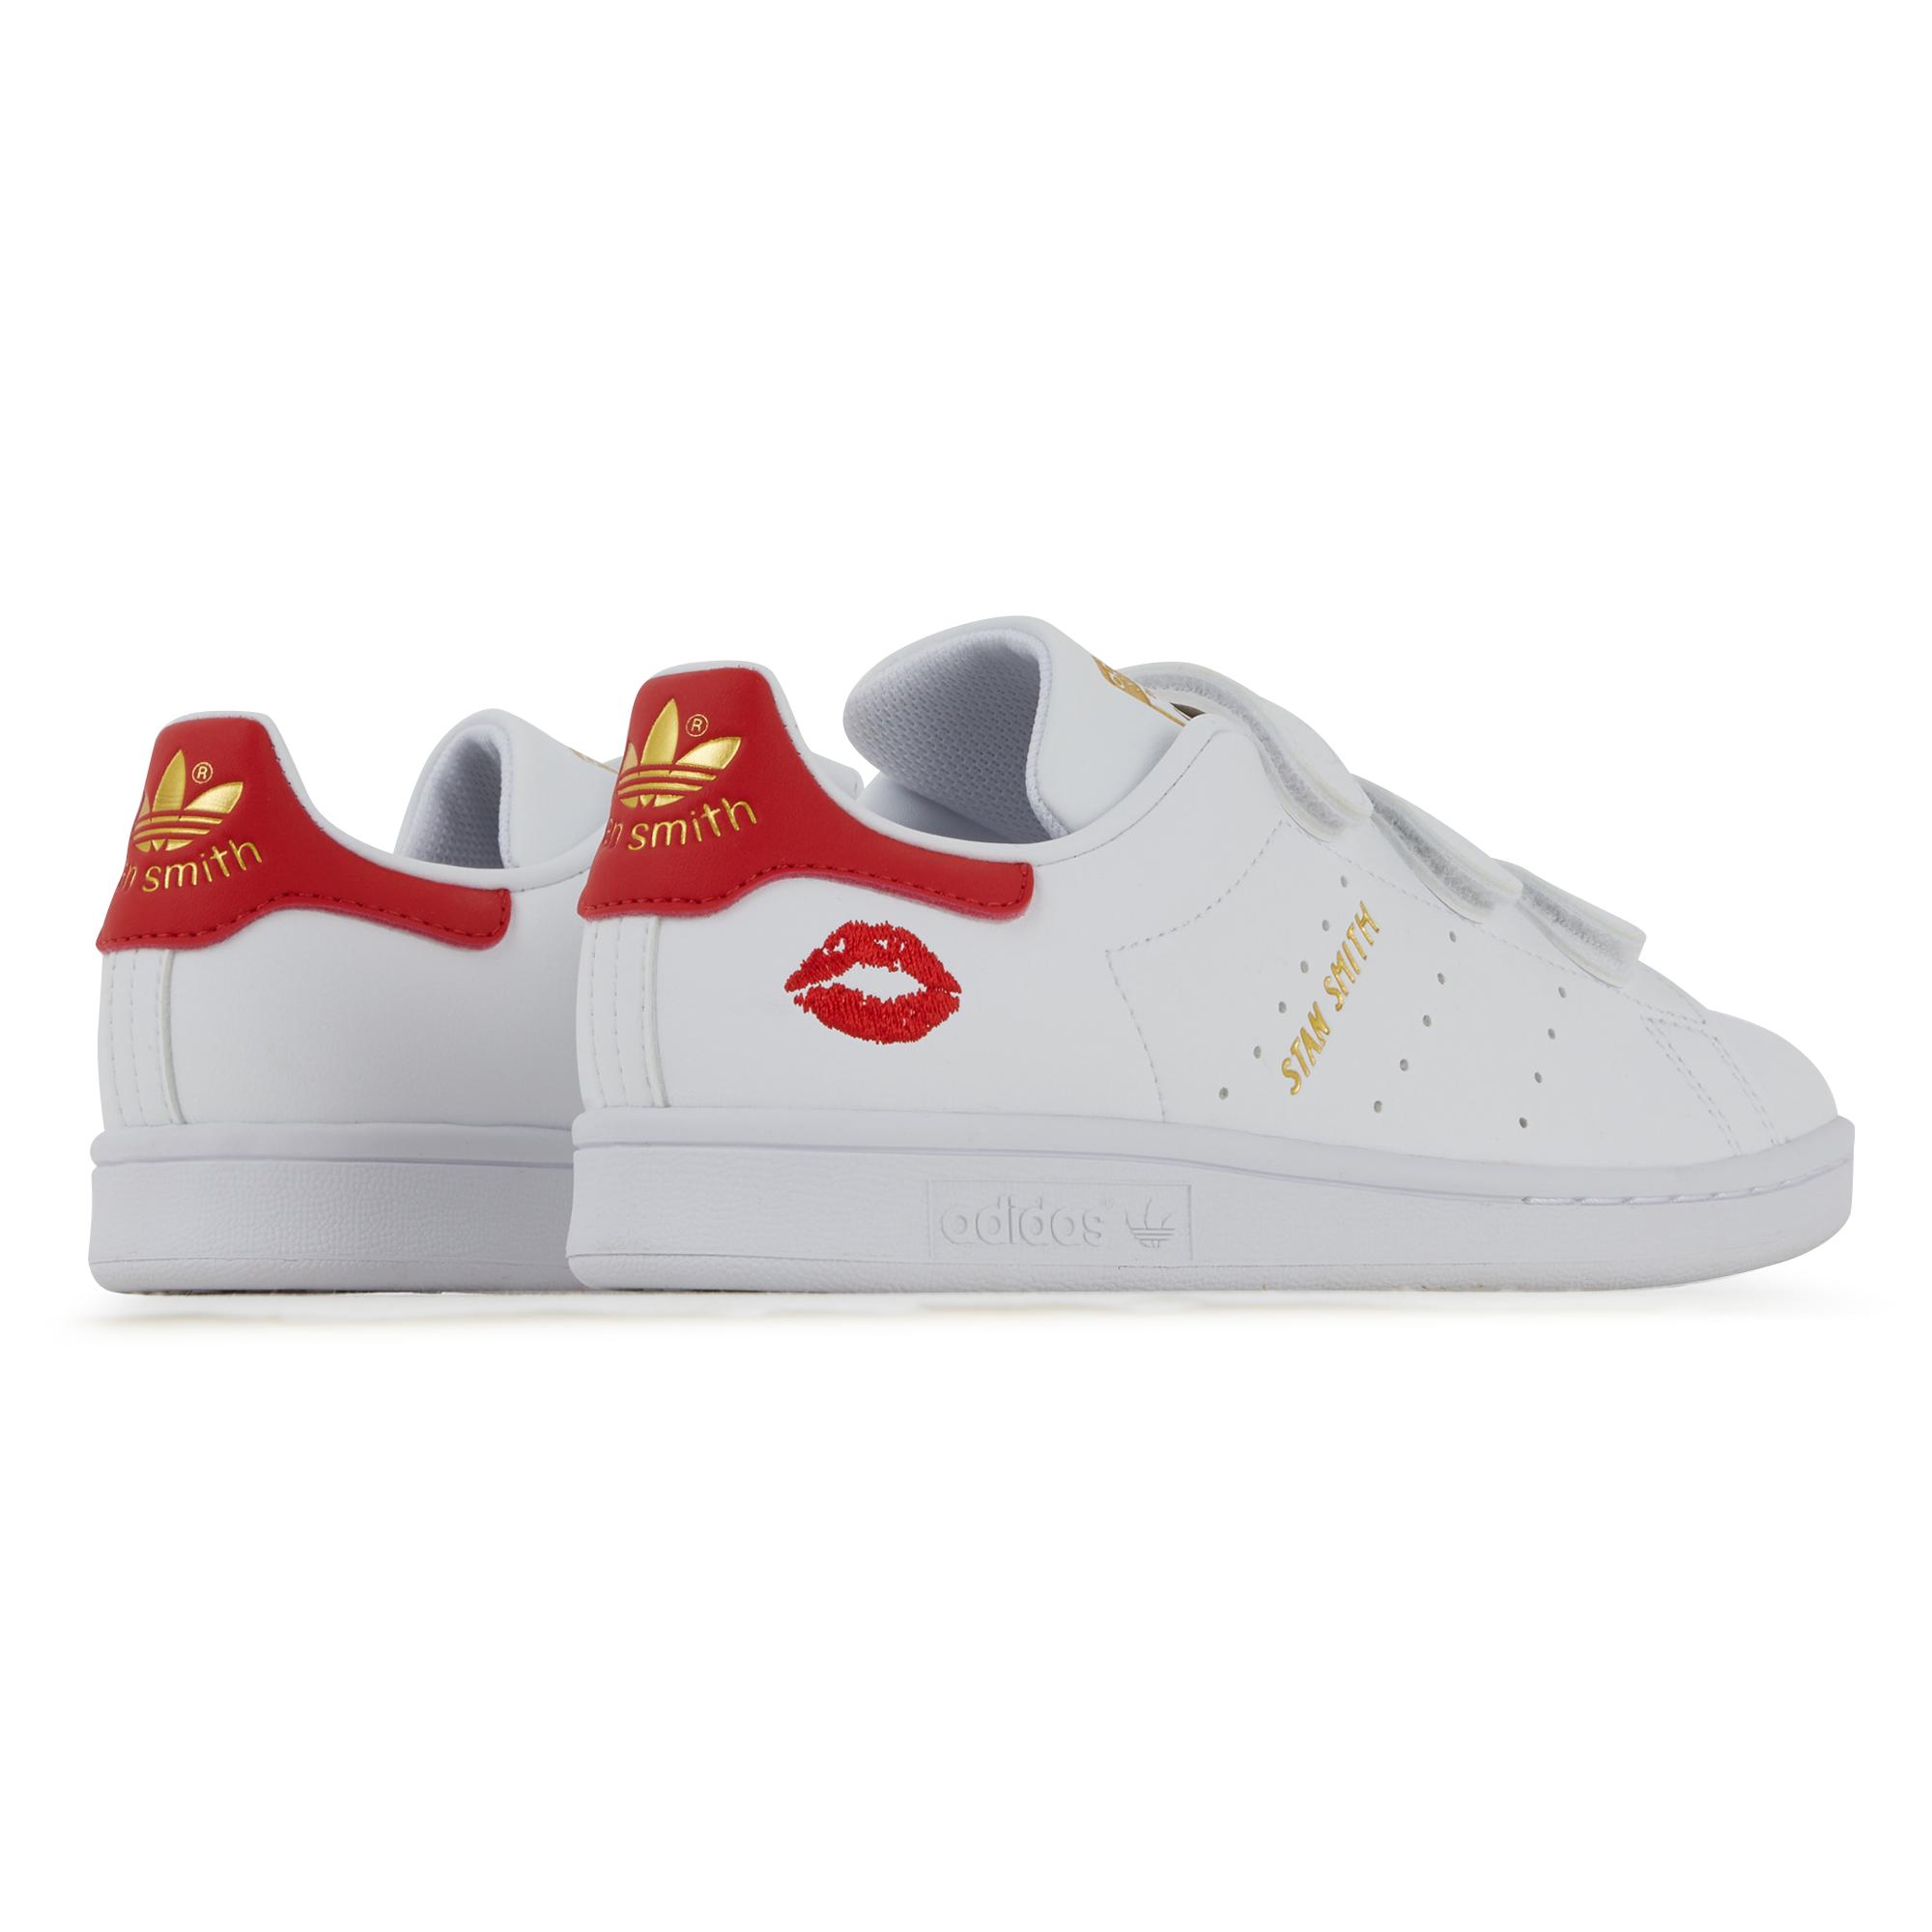 stan smith saint valentin 2020, significant discount Save 85% available -  simourdesign.com